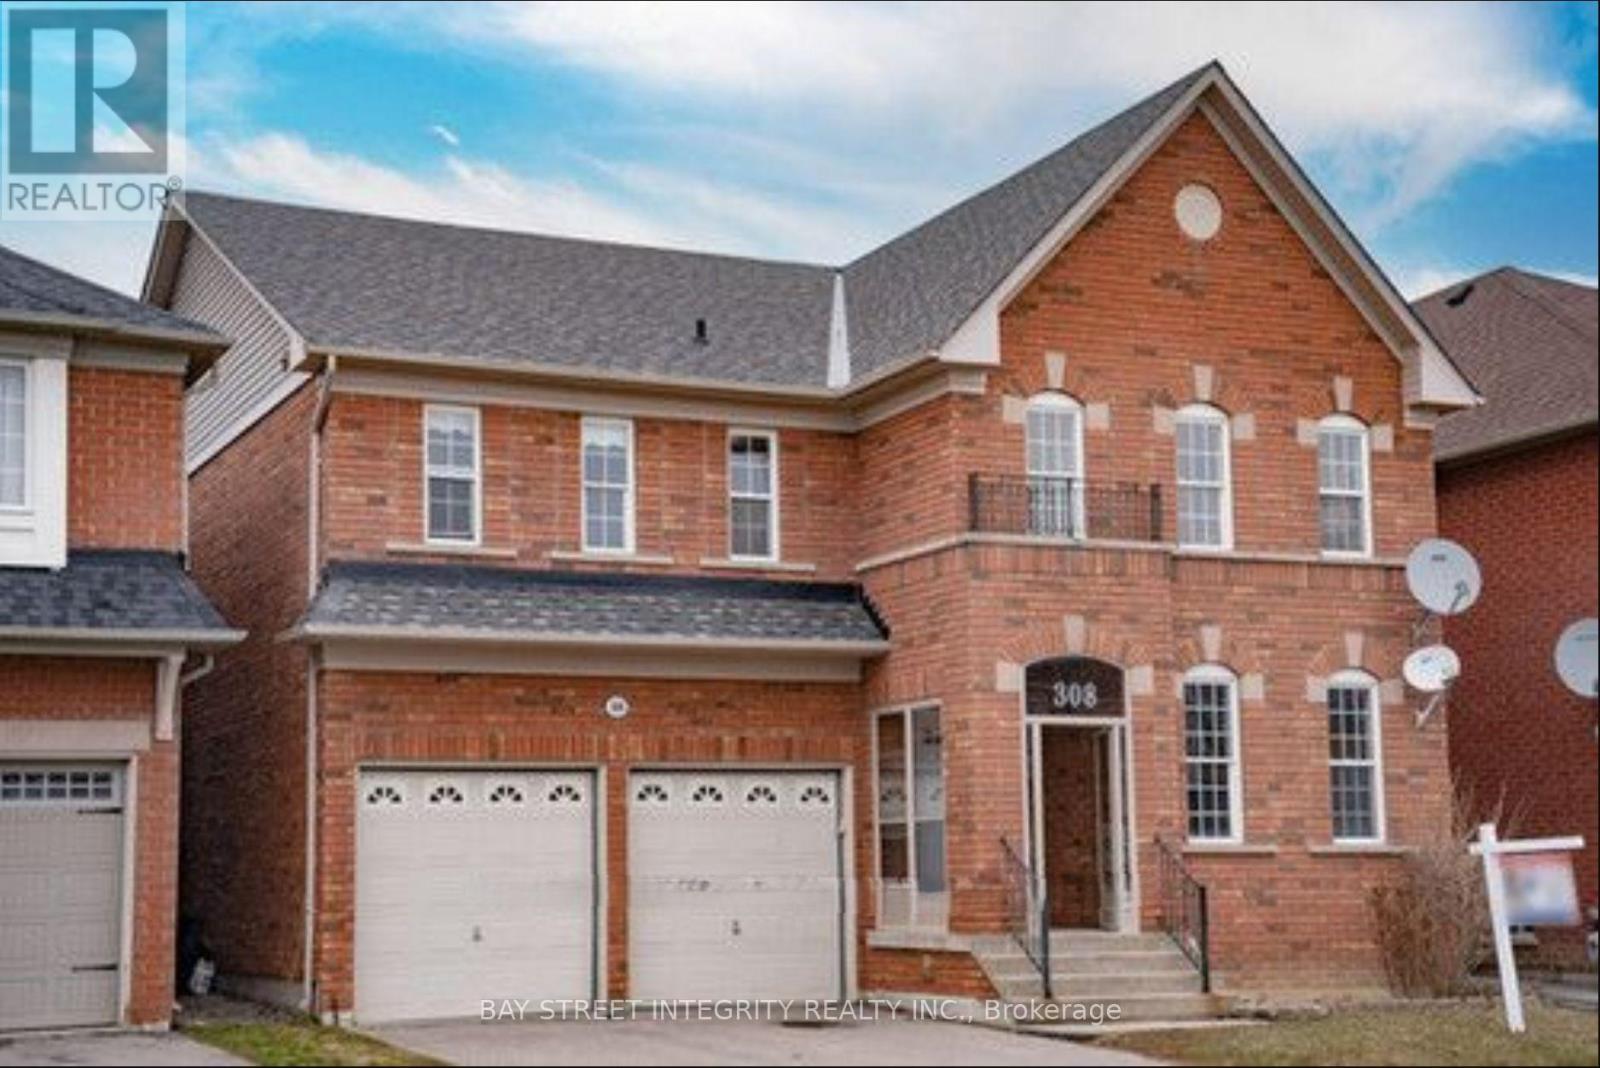 308 TOWER HILL ROAD, richmond hill, Ontario